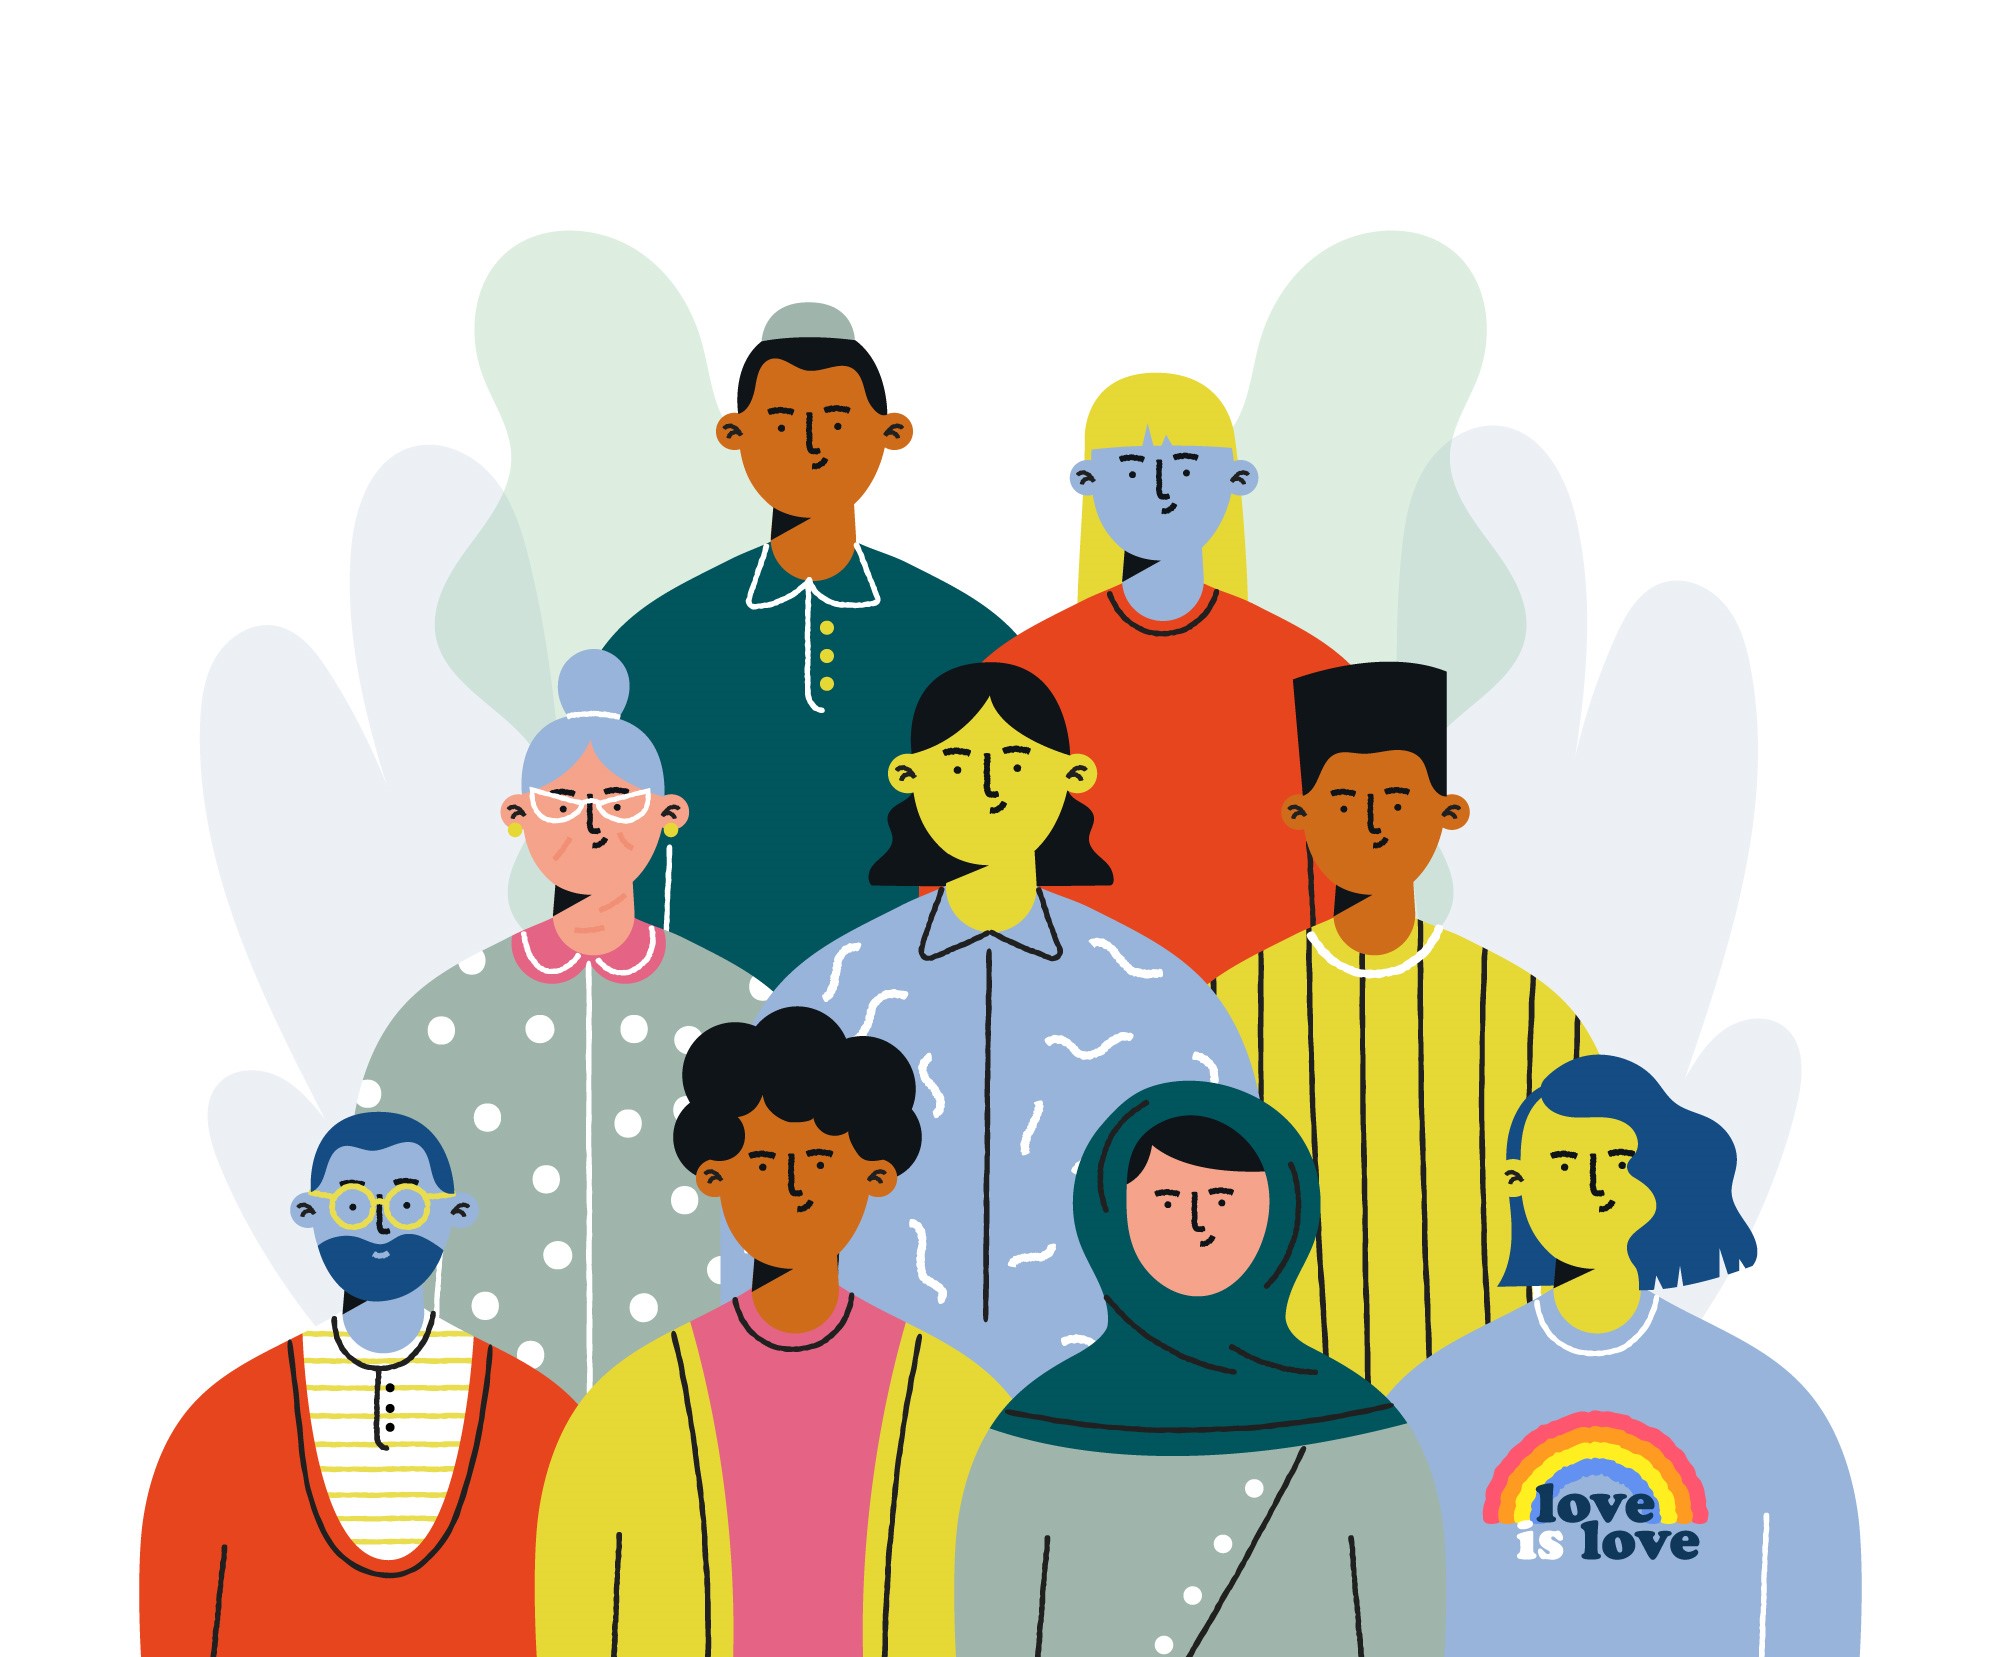 An illustration of people from different racial backgrounds and social constructs